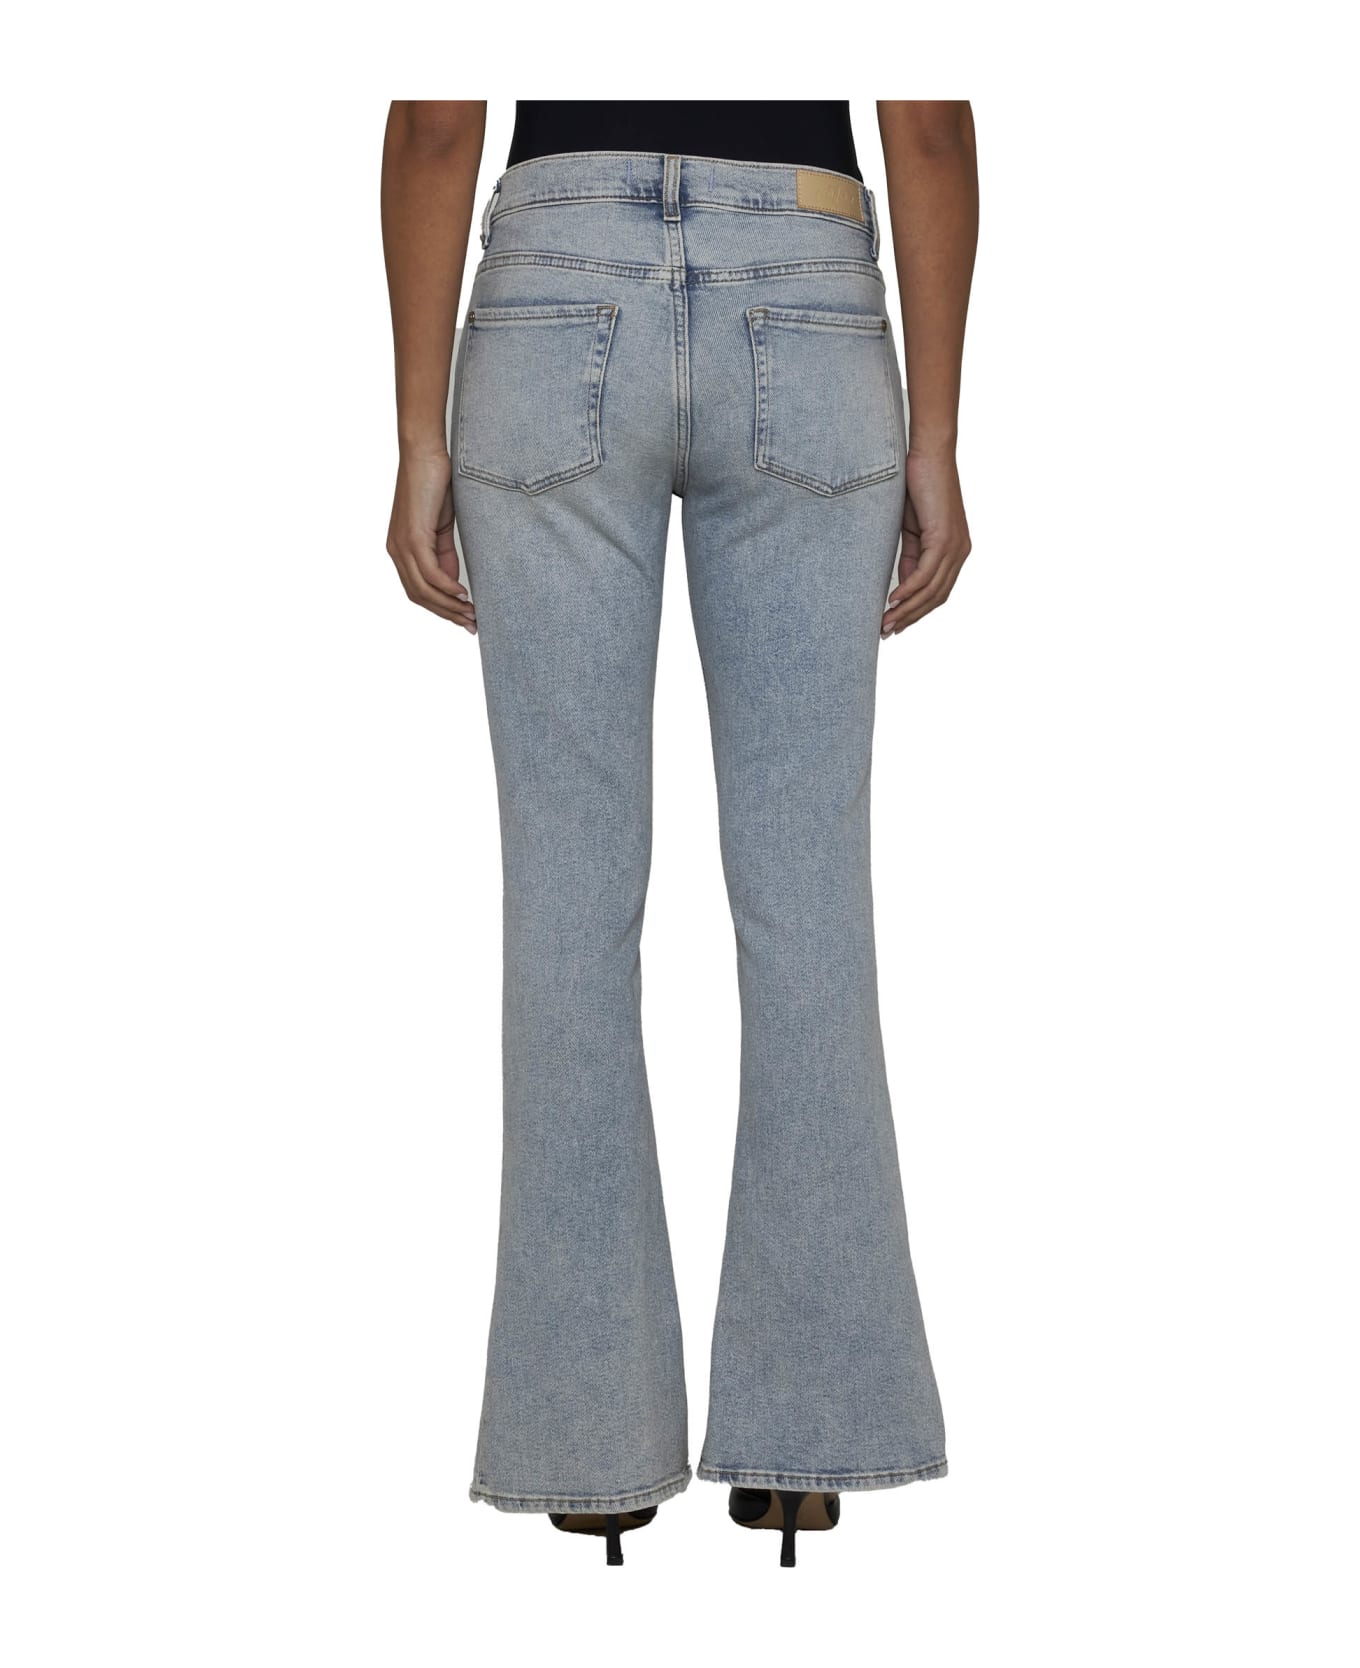 7 For All Mankind Jeans - Blue デニム